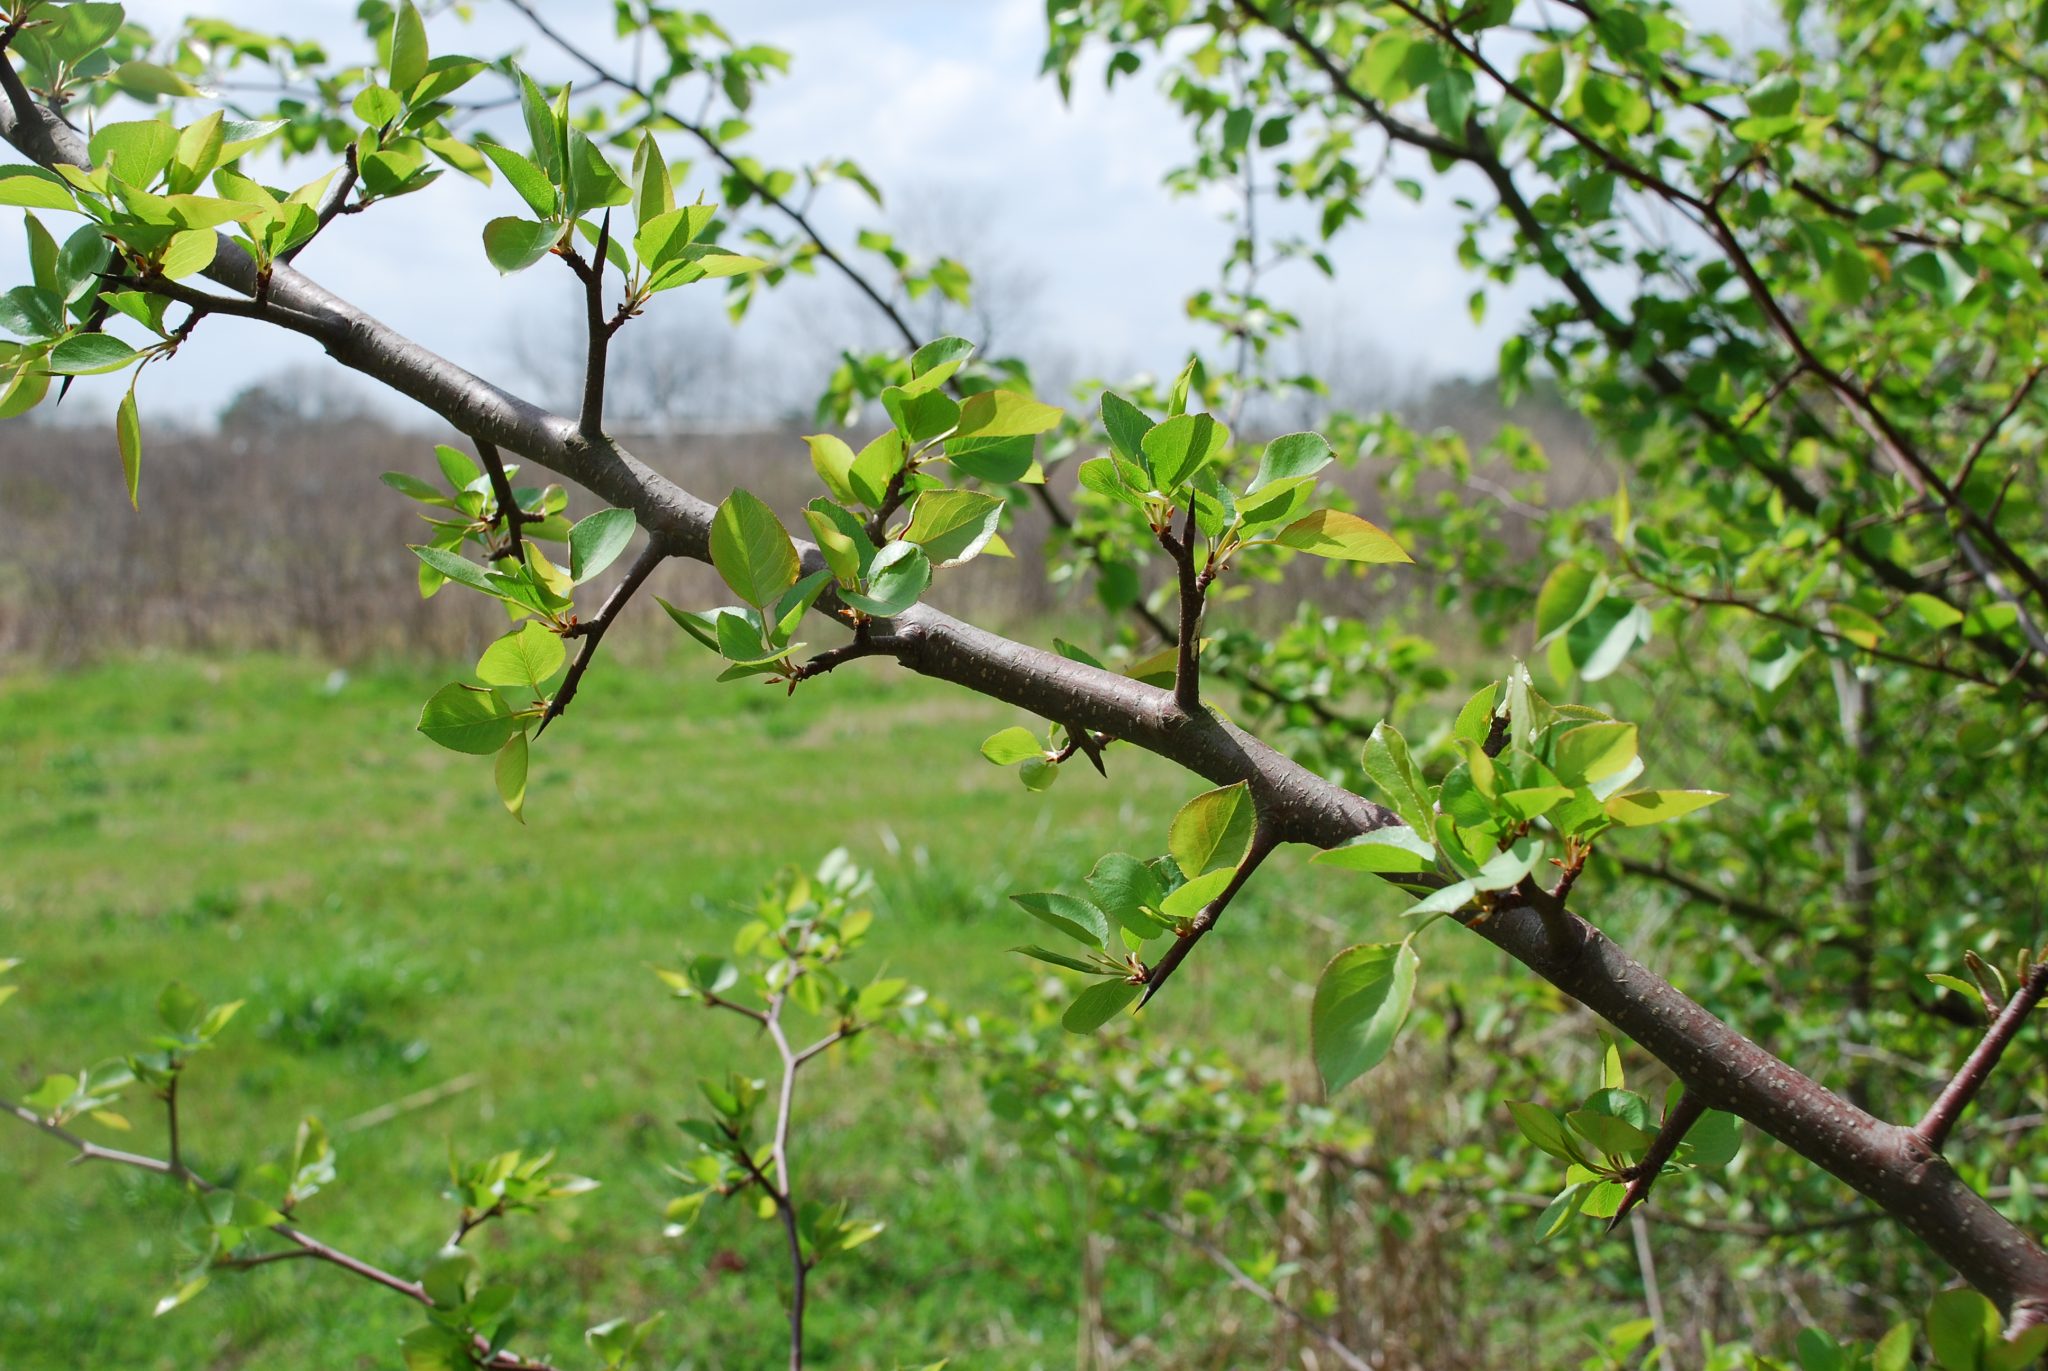 Figure 2. Sharp spur shoots (thorns) add to the problems associated with Callery pear invasions (photo by Nancy Loewenstein)